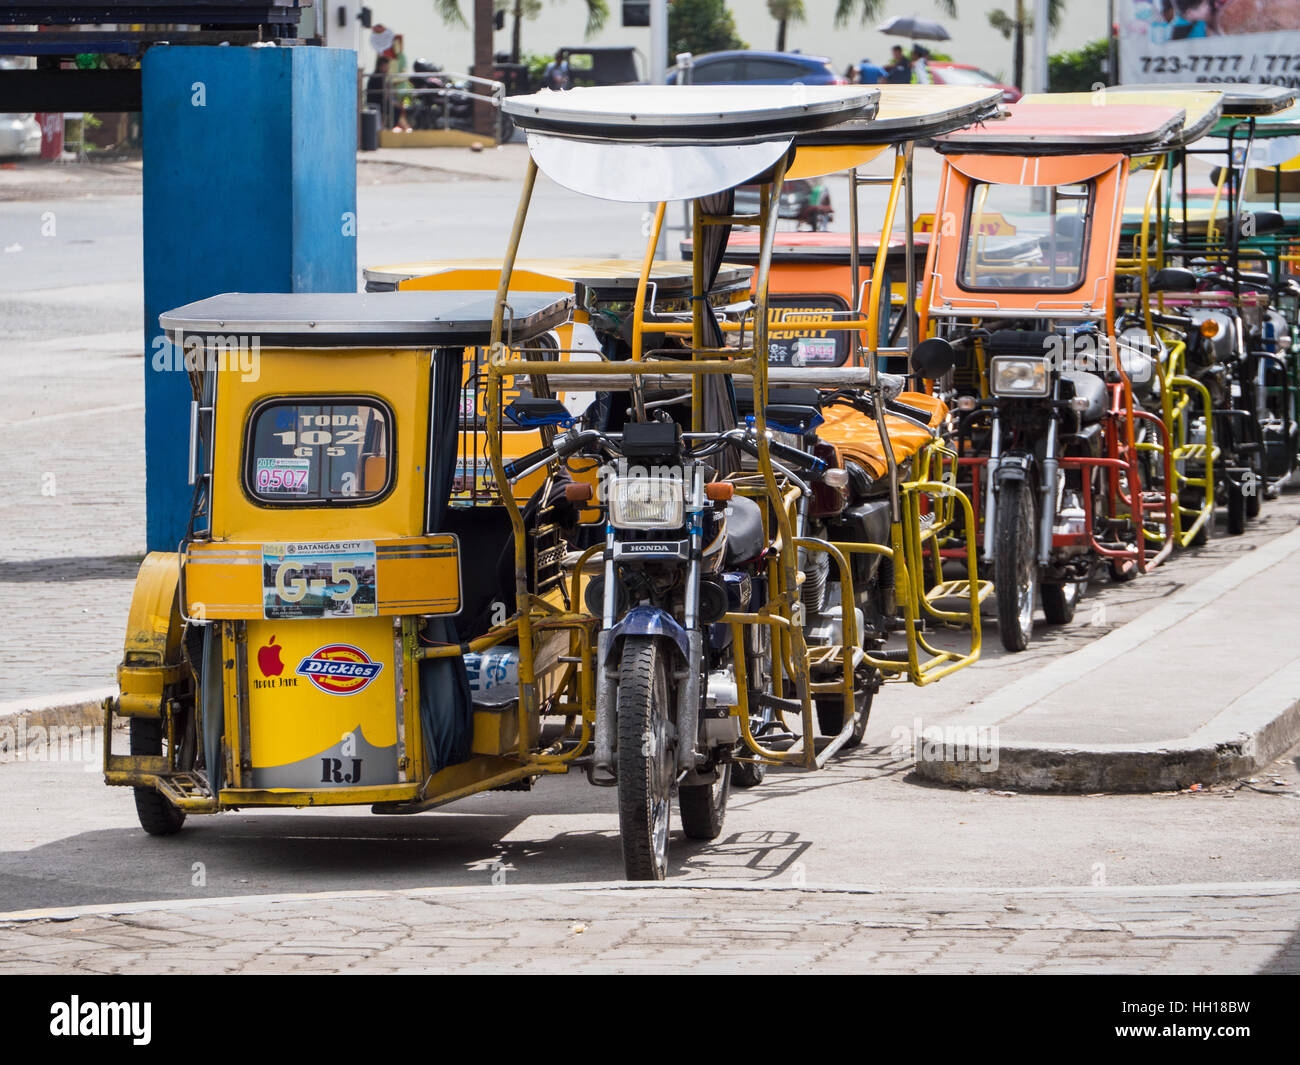 Three wheel motorcycle taxis waiting for passengers in Batangas City, the capital of the Province of Batangas in The Philippines. Stock Photo